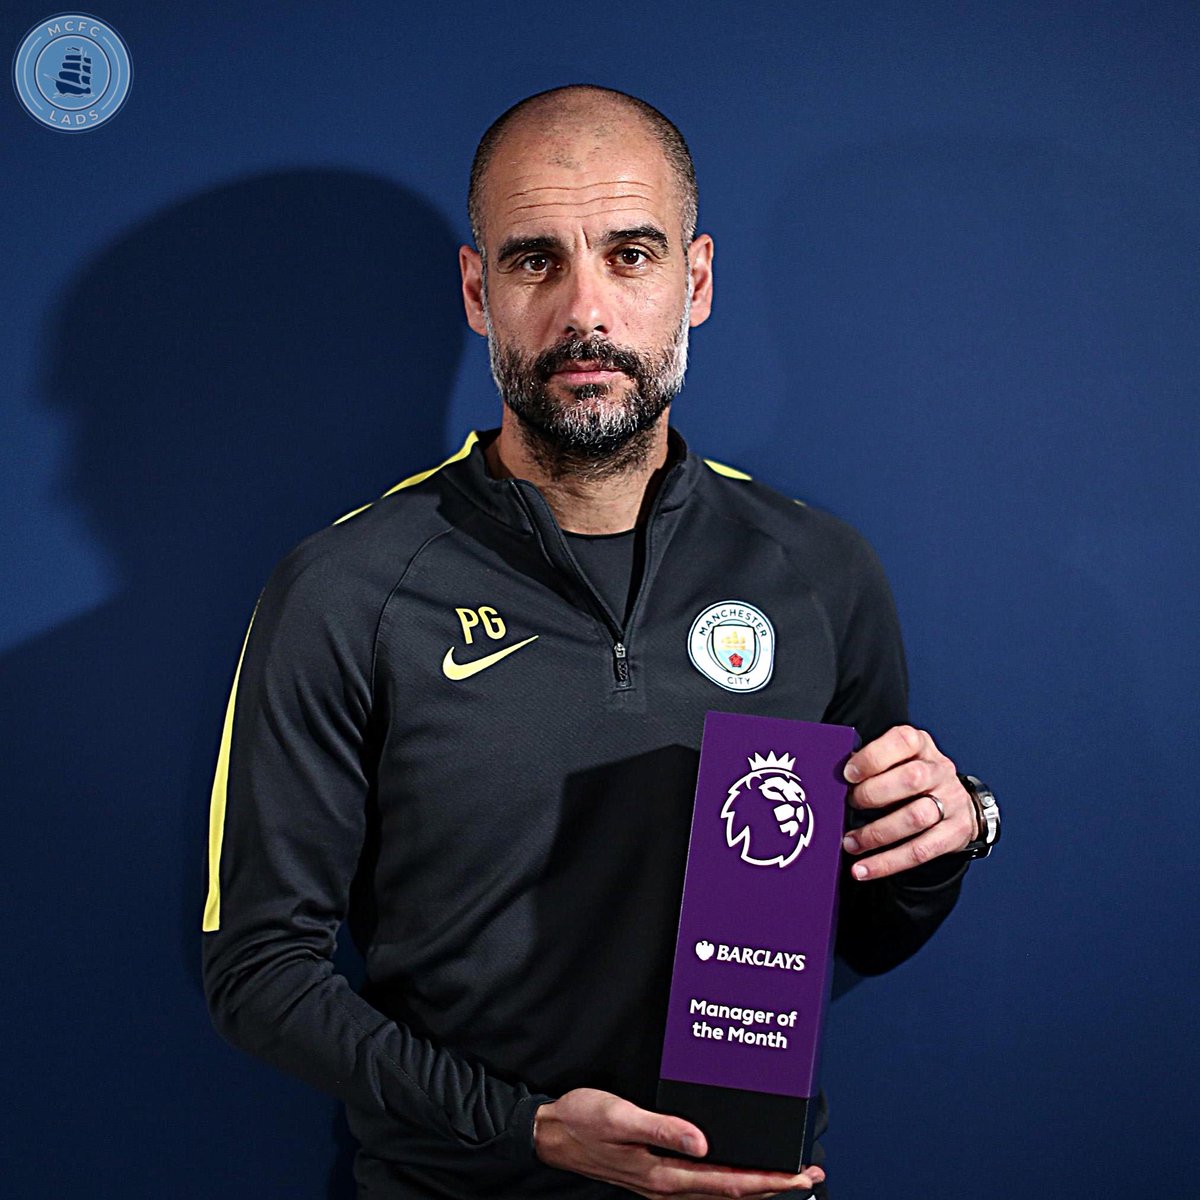 Pep Guardiola misses out on yet another #PL Manager of the Month award. ❌ 

He hasn’t won one since 2021.